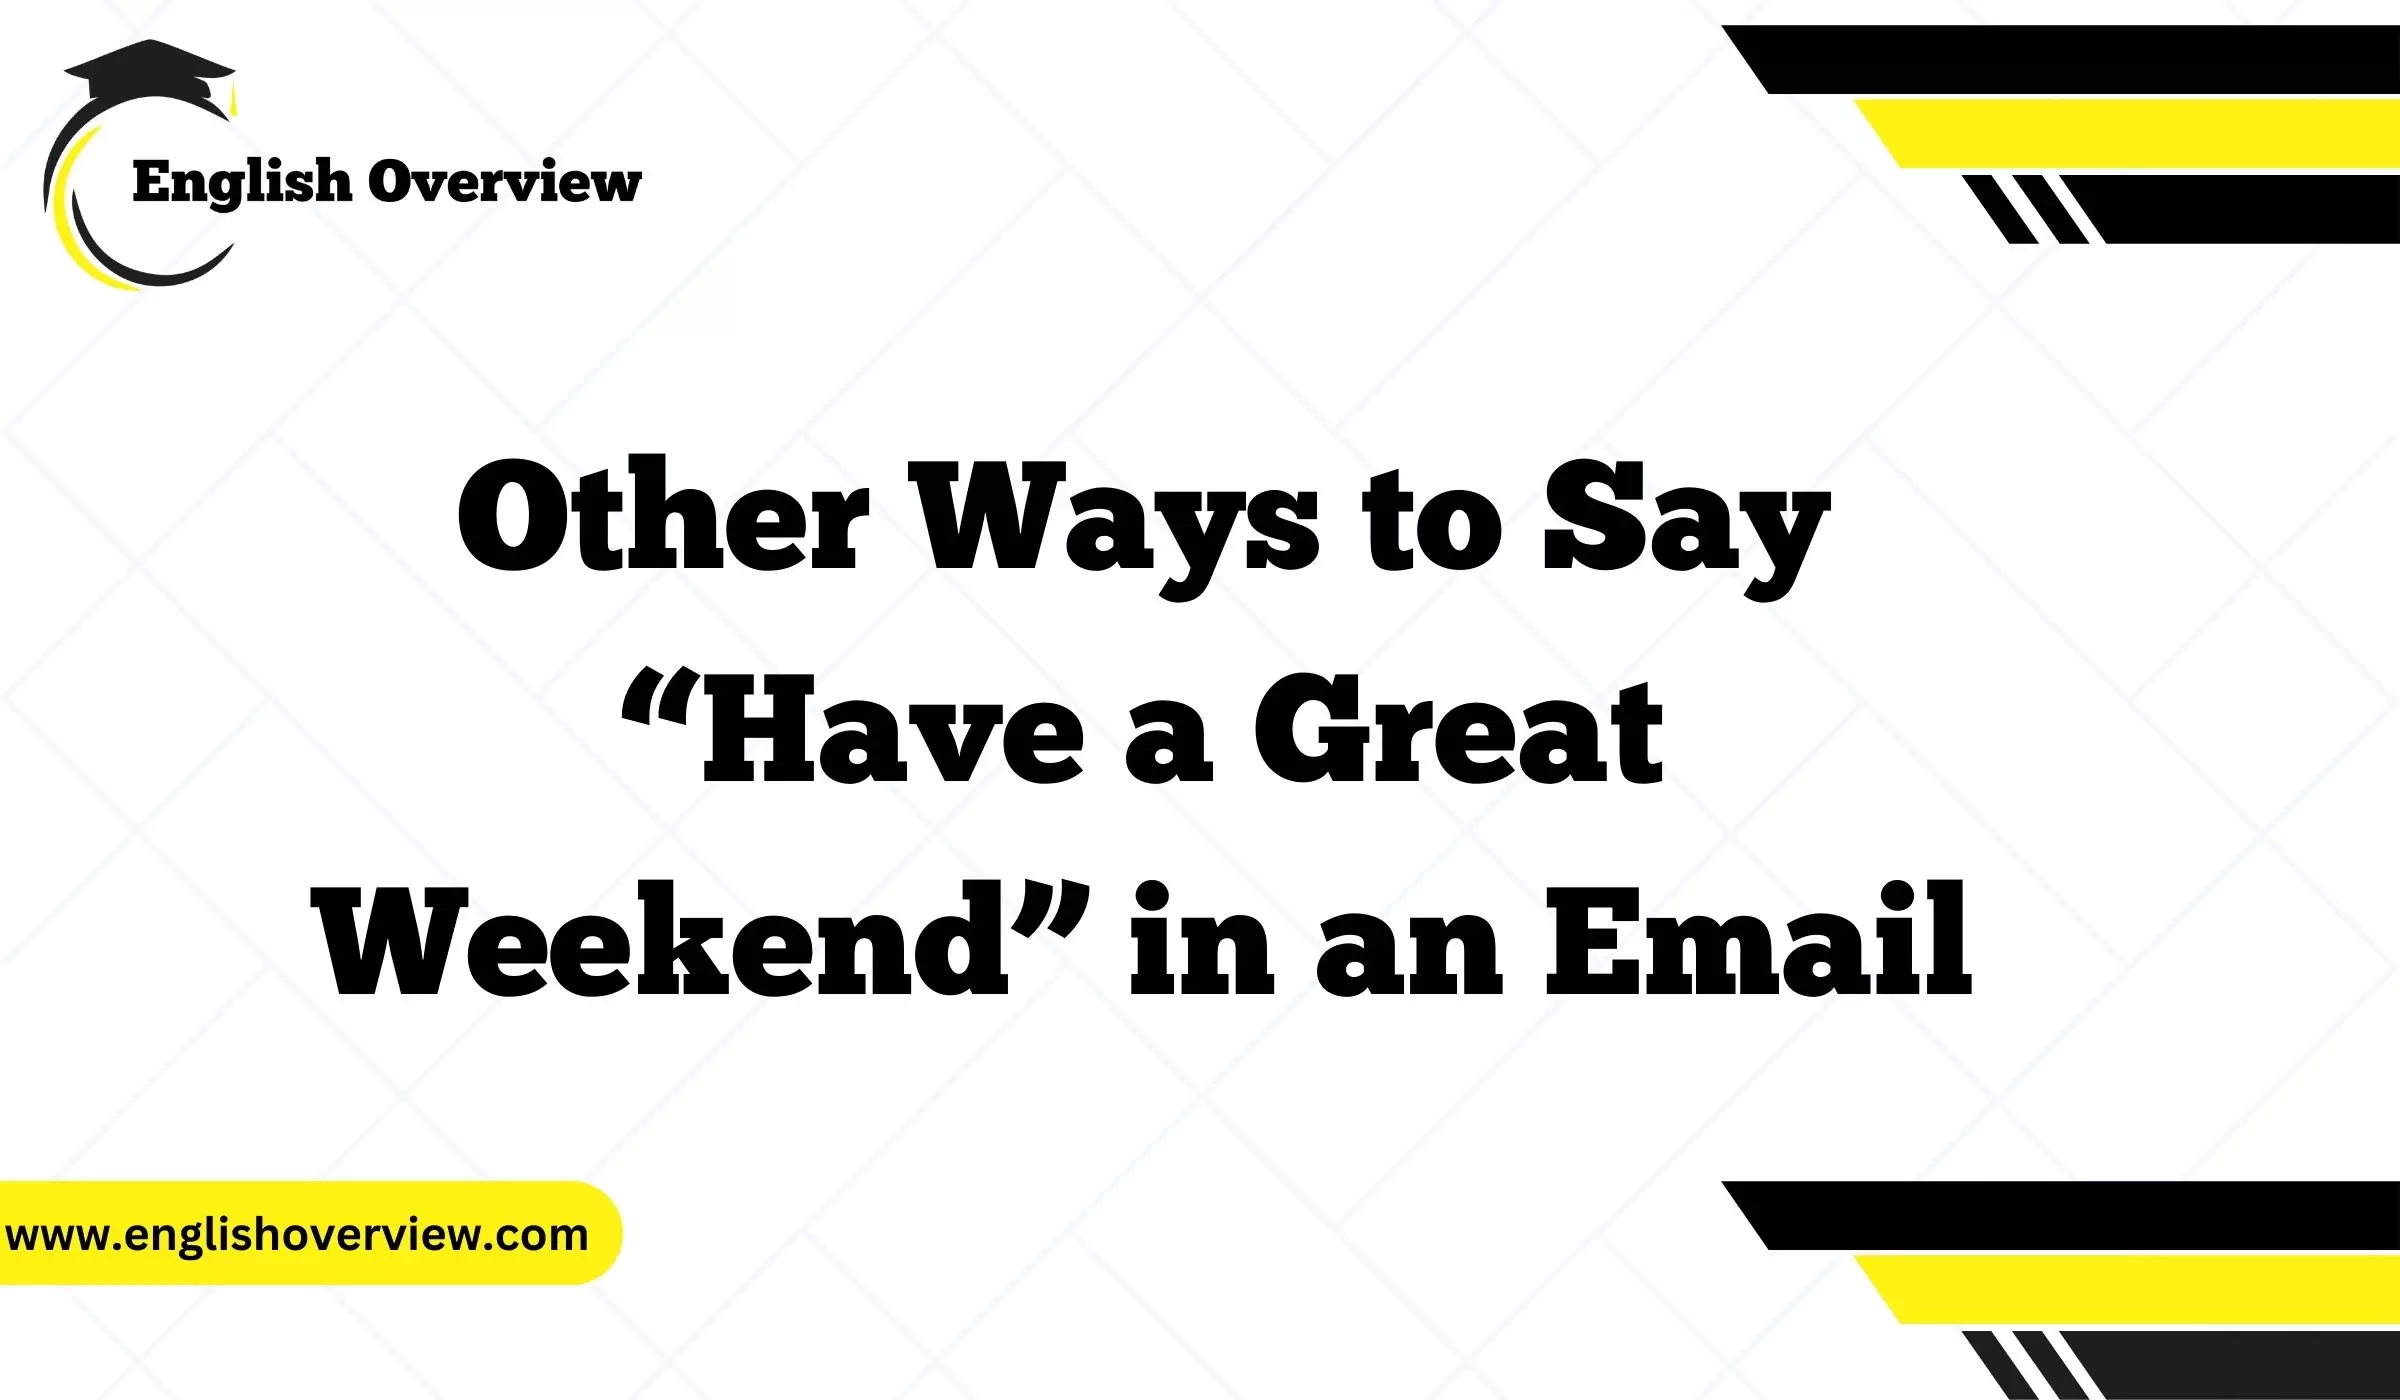 Other Ways to Say “Have a Great Weekend” in an Email